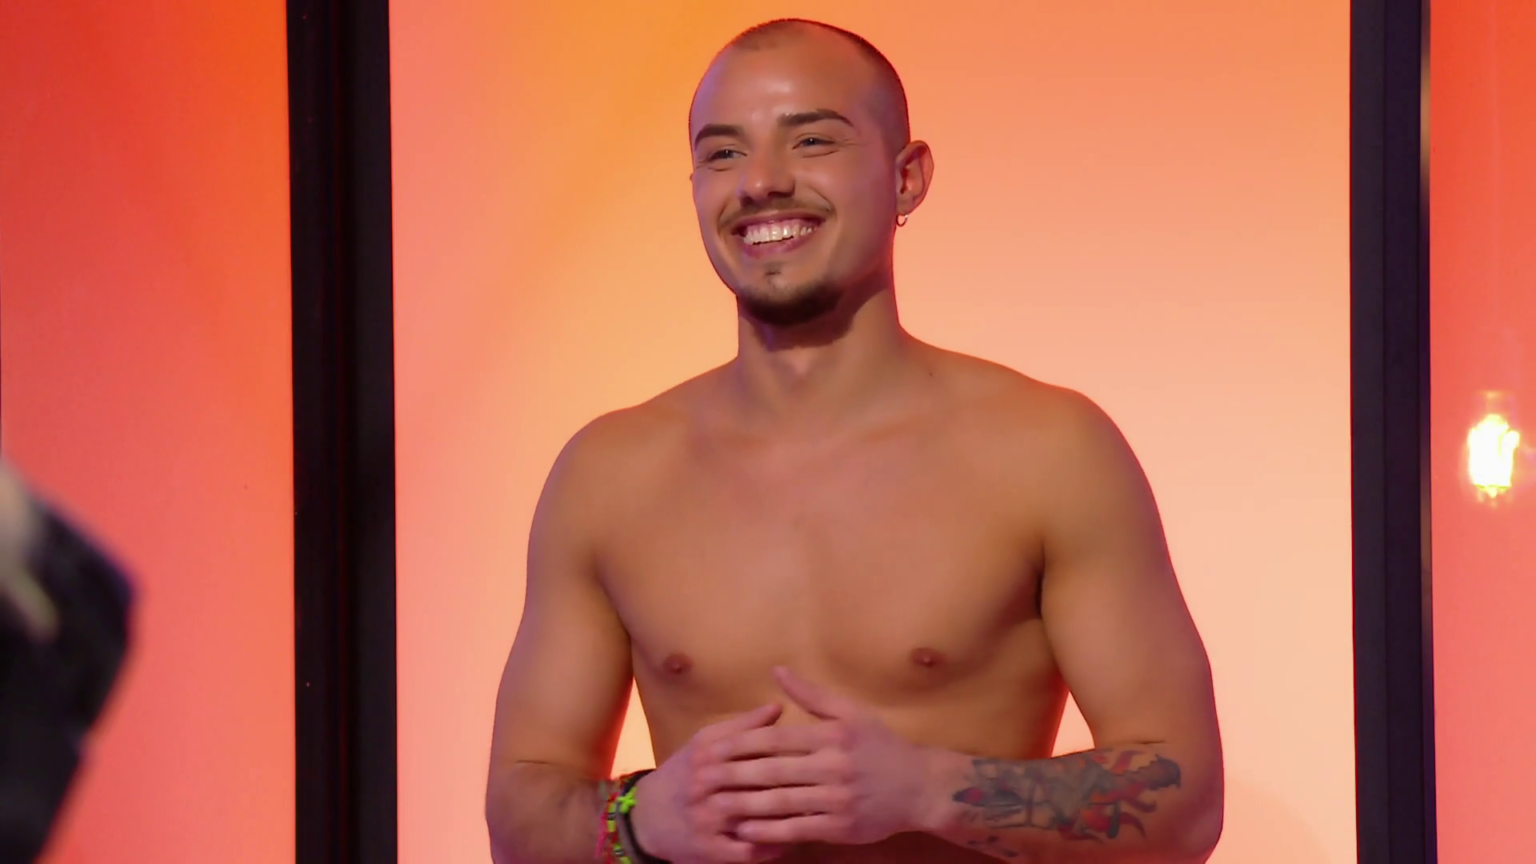 Naked Attraction to feature its first non-binary 